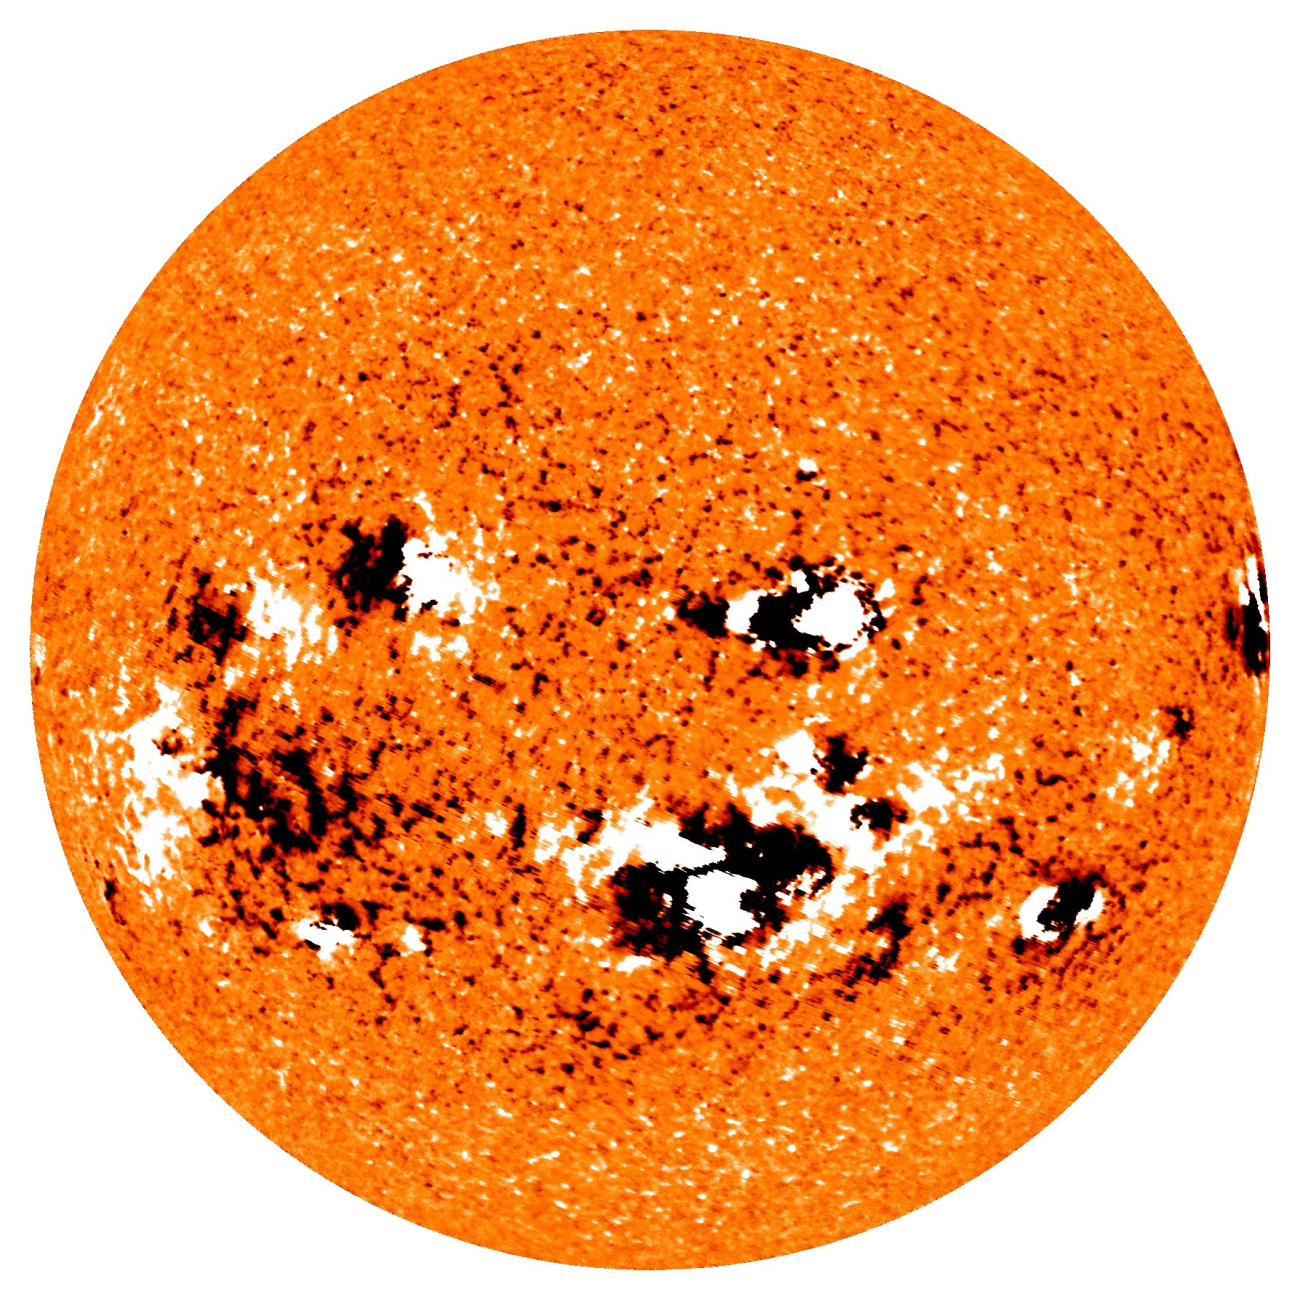 Image of solar storm activity on surface of sun